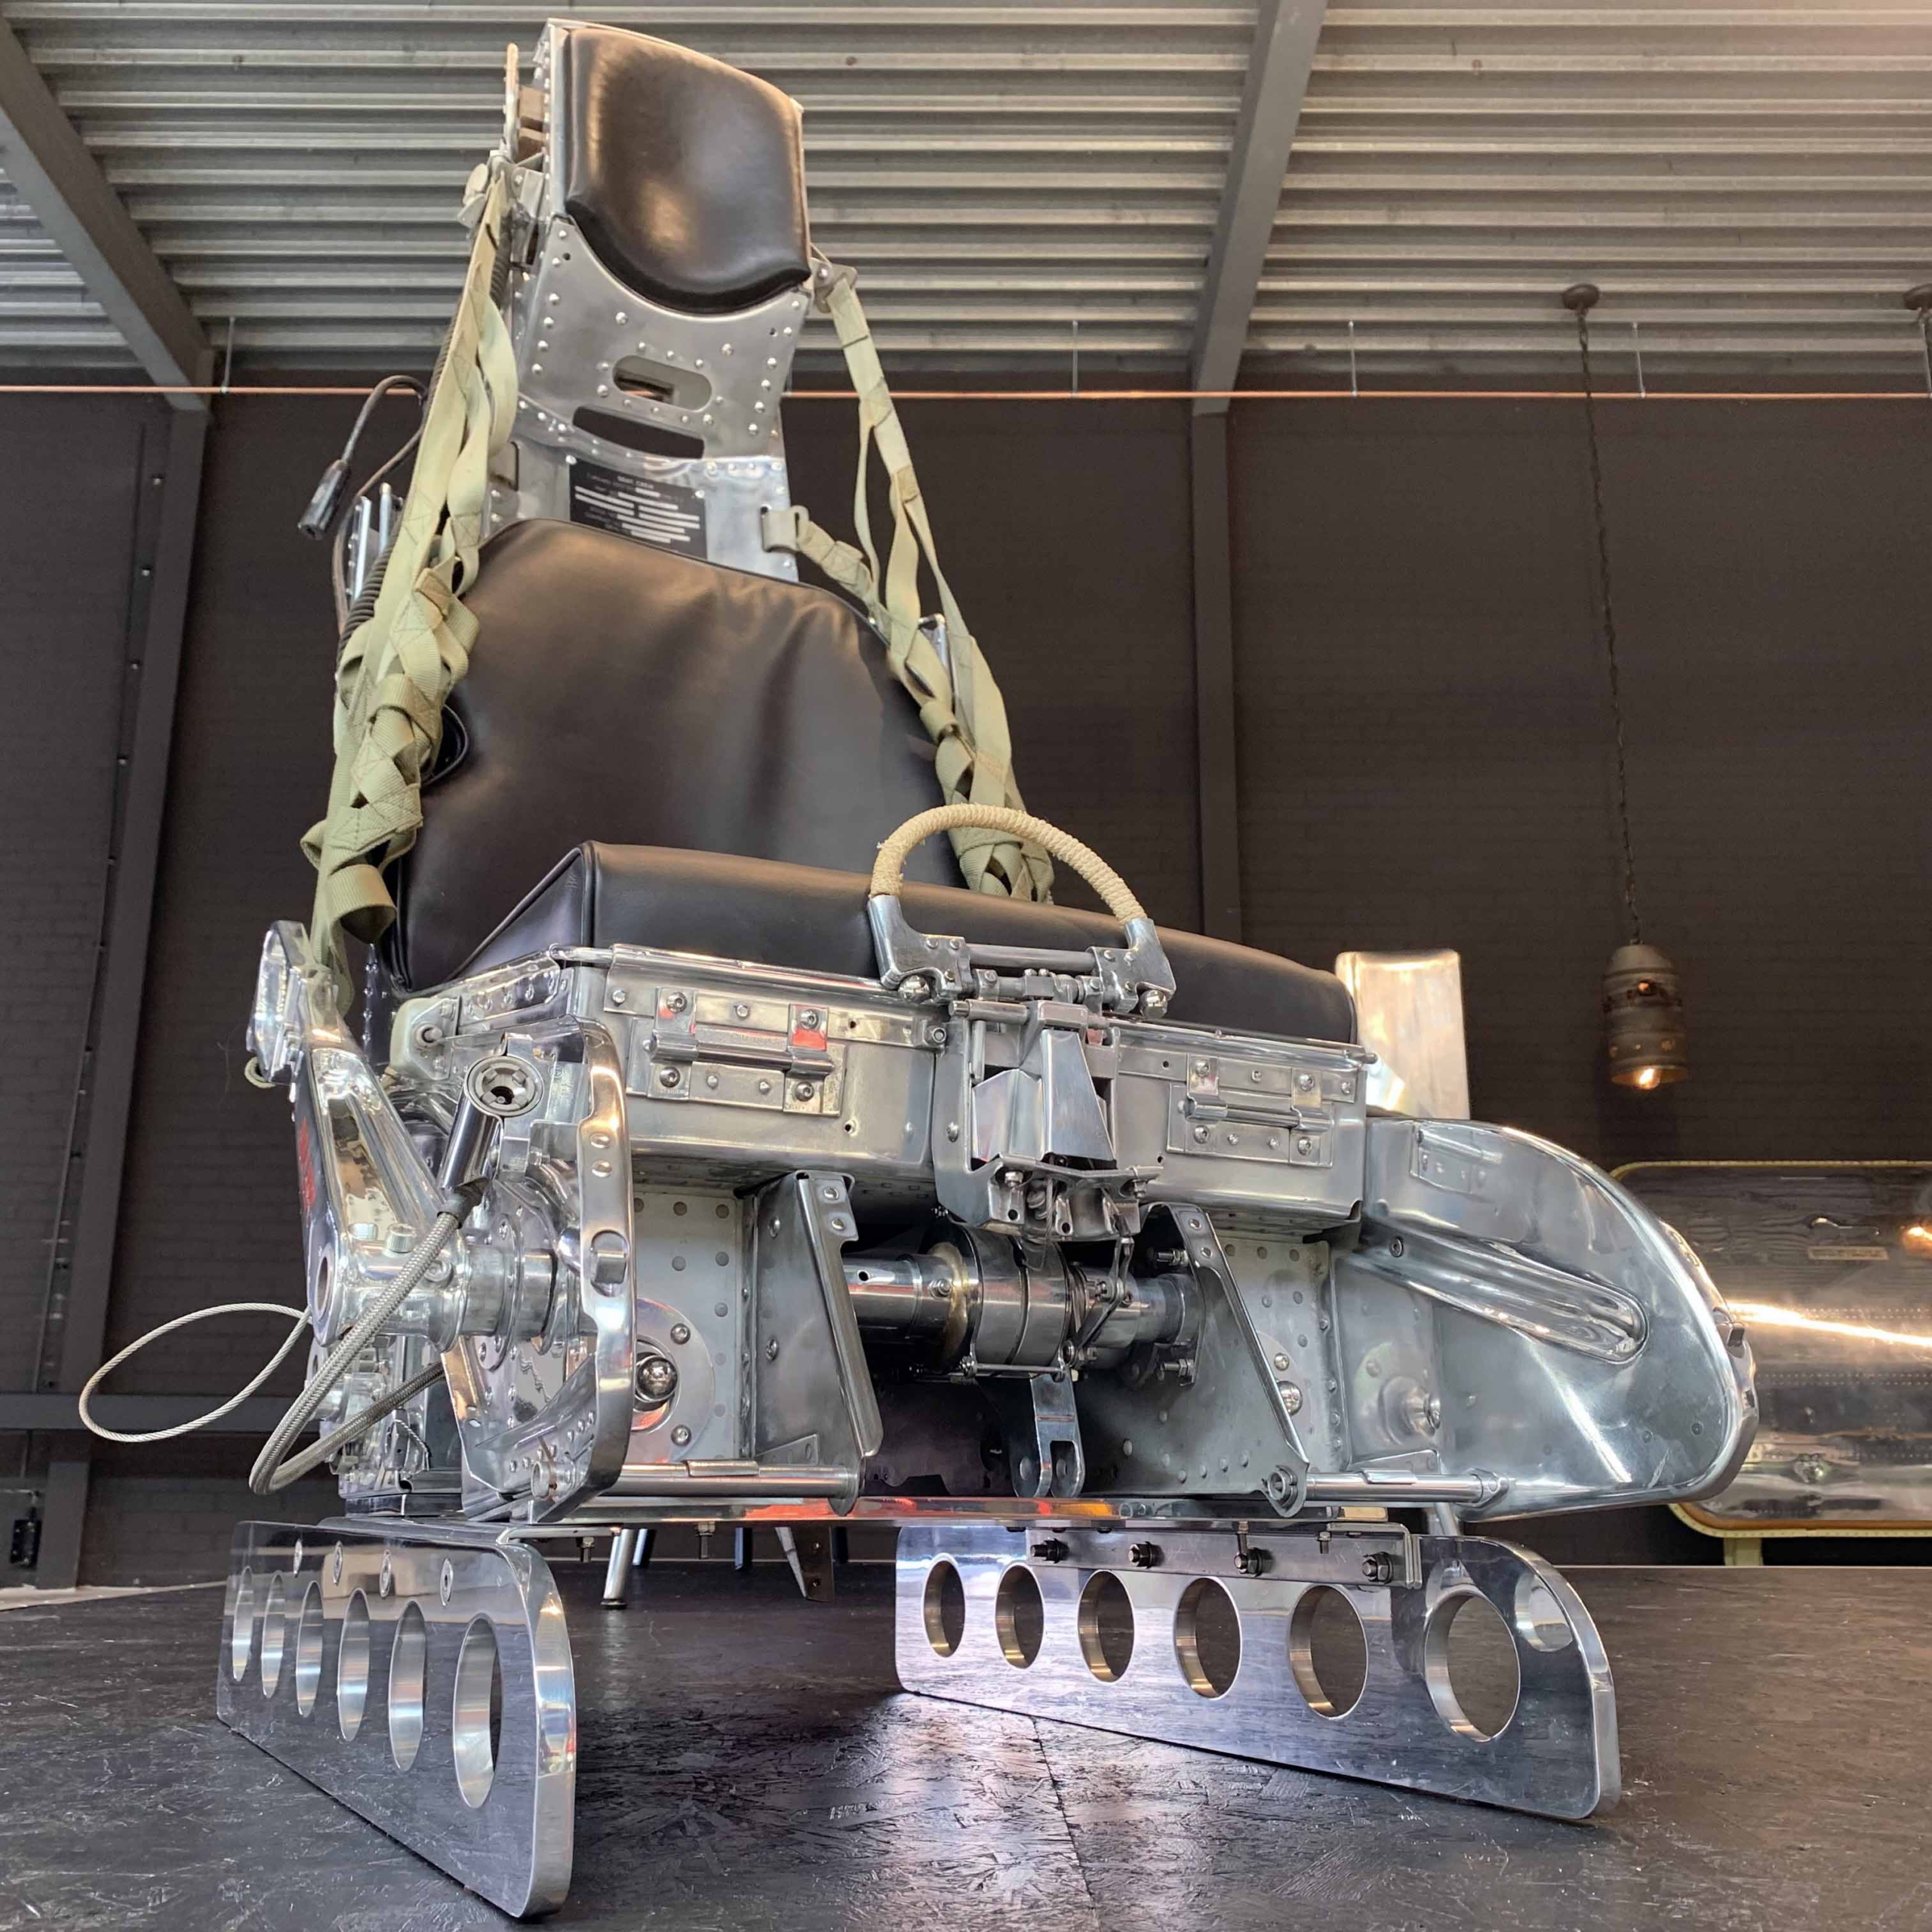 Polished Lockheed Martin C2 ejection seat as displayed in Kaeve in Uden.